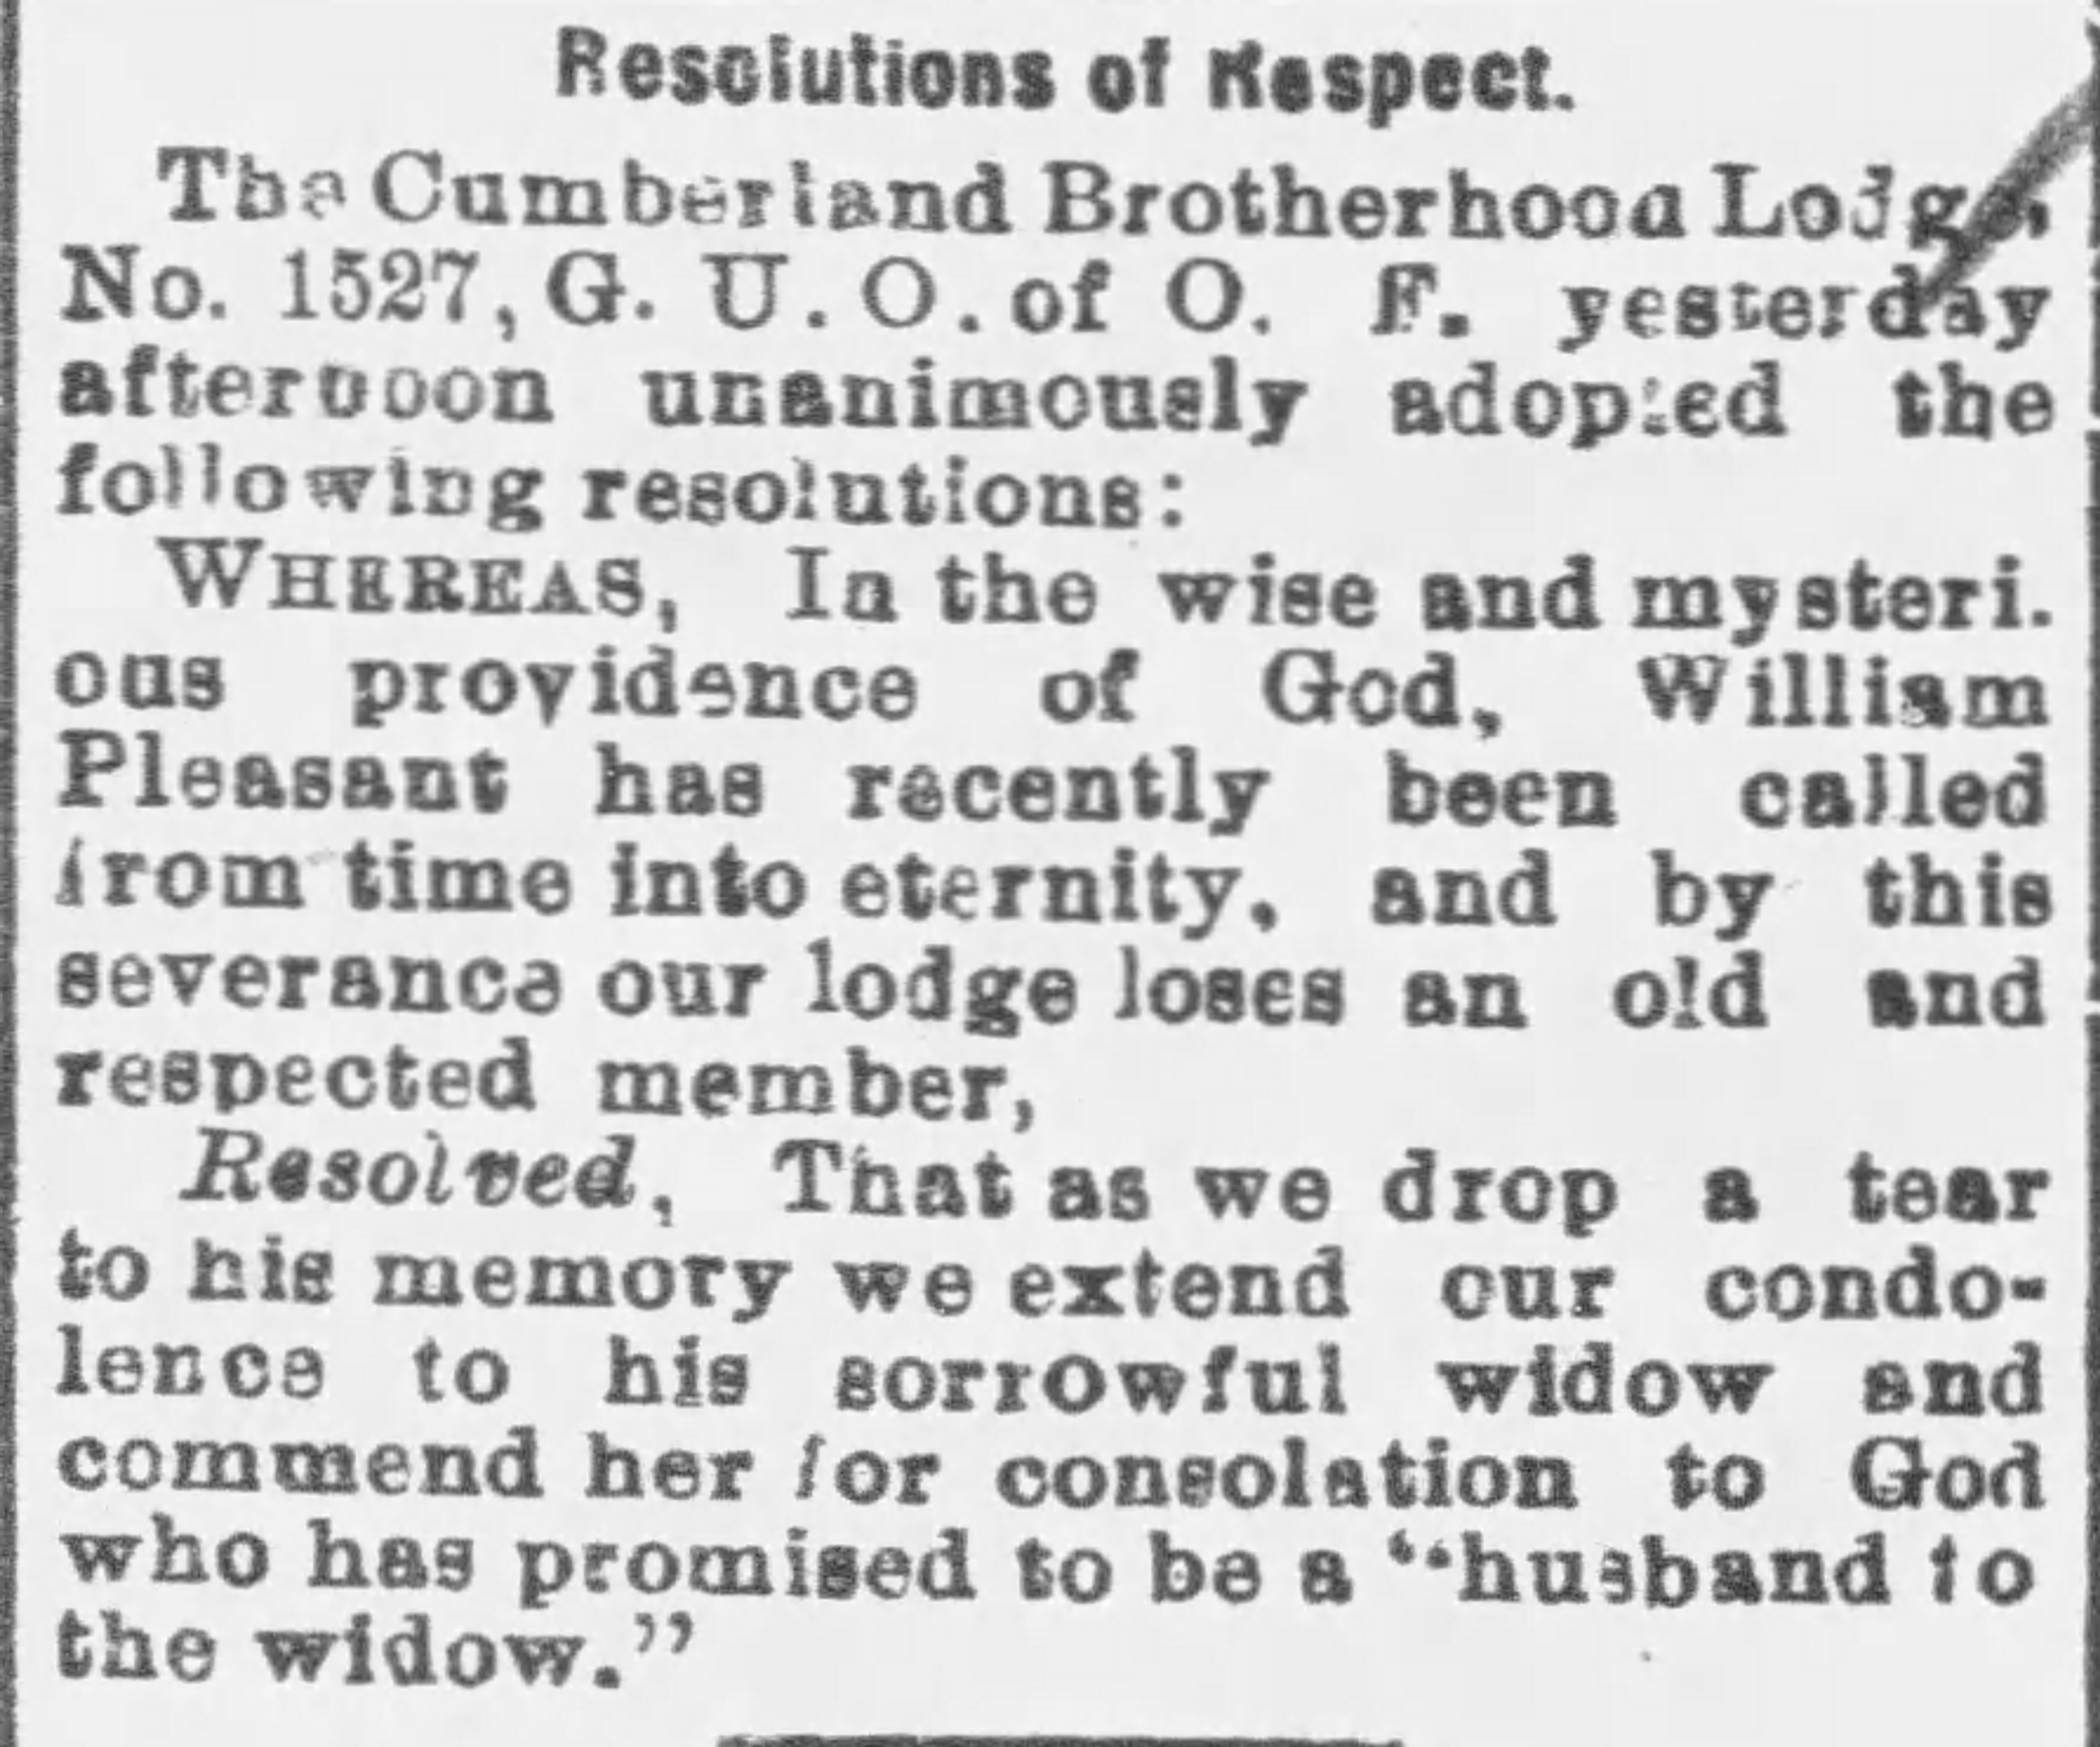 A newspaper article by the Cumberland Brotherhood Lodge paying their respects to the family of William Pleasant